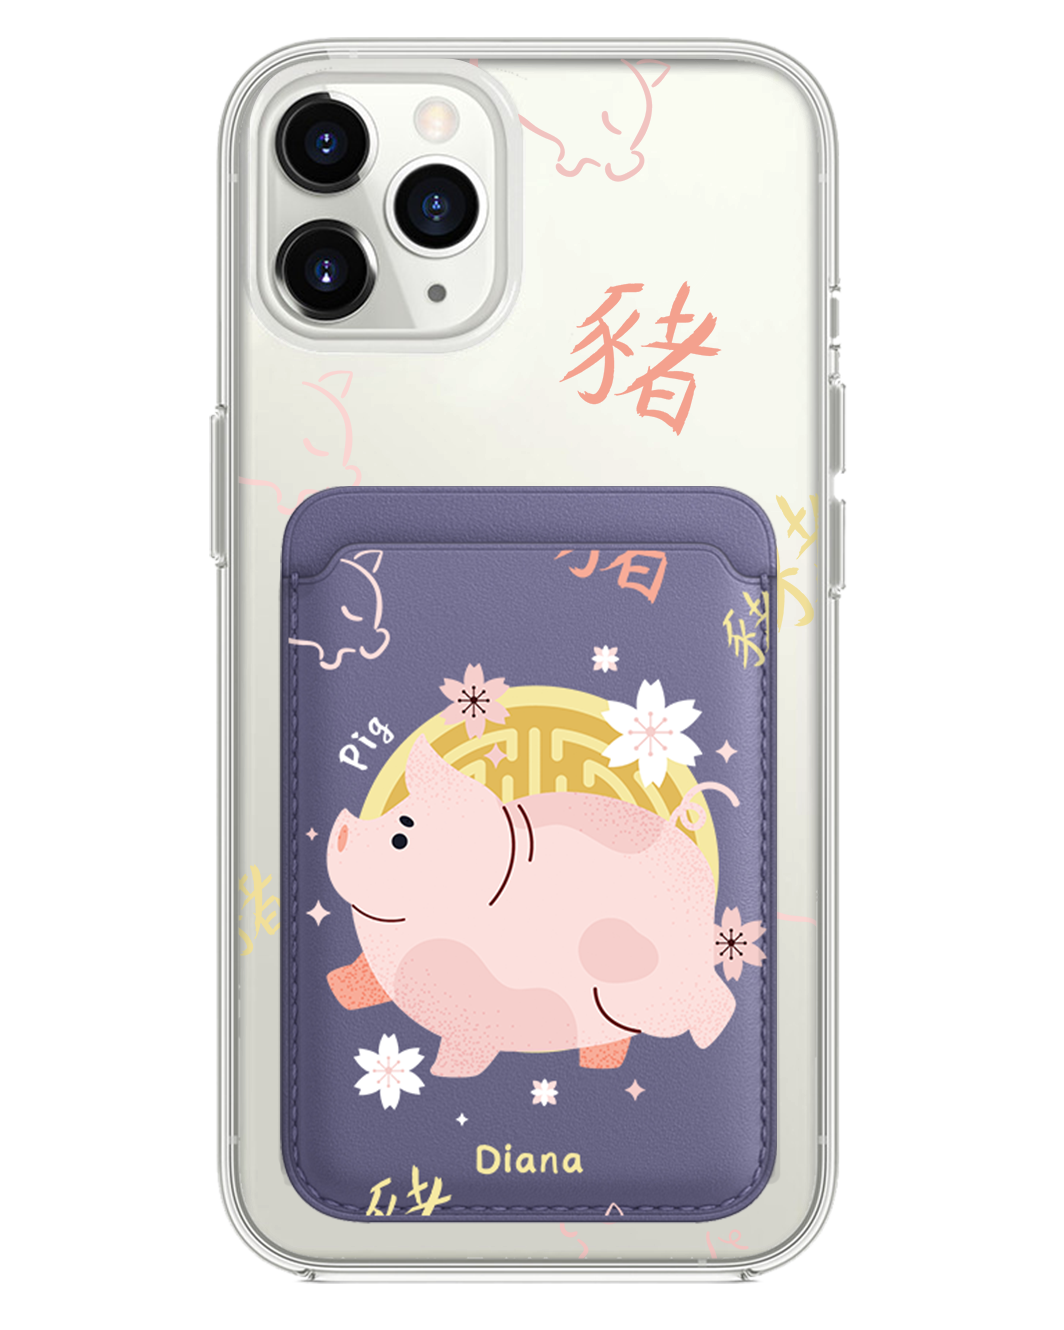 iPhone Magnetic Wallet Case - Pig (Chinese Zodiac / Shio)